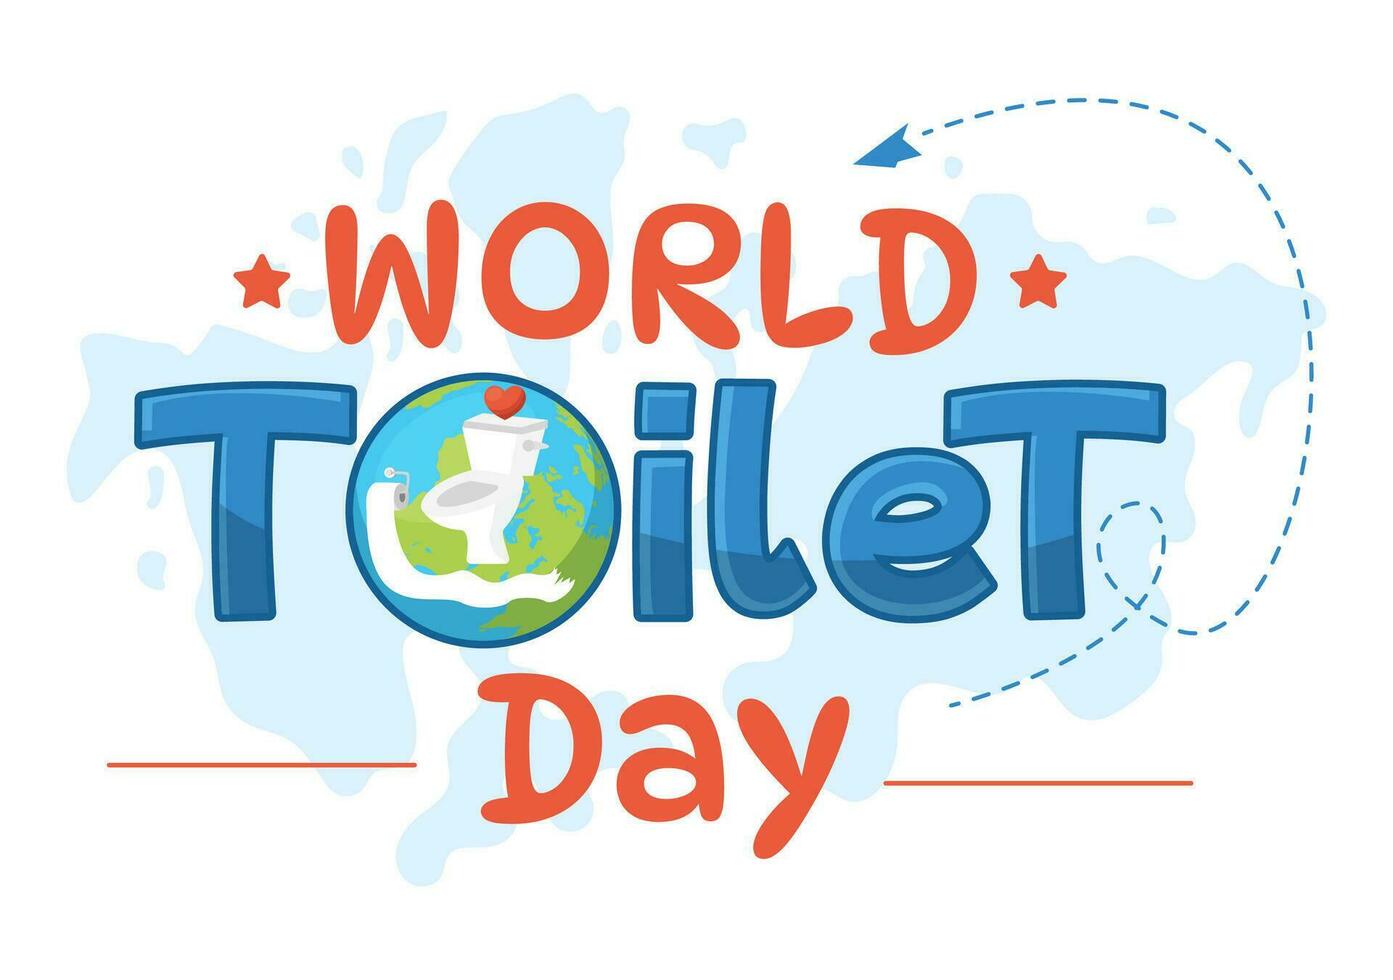 World Toilet Day Vector Illustration on 19 November with Earth and Equipment for Bathroom Hygiene Awareness in Flat Cartoon Background Design